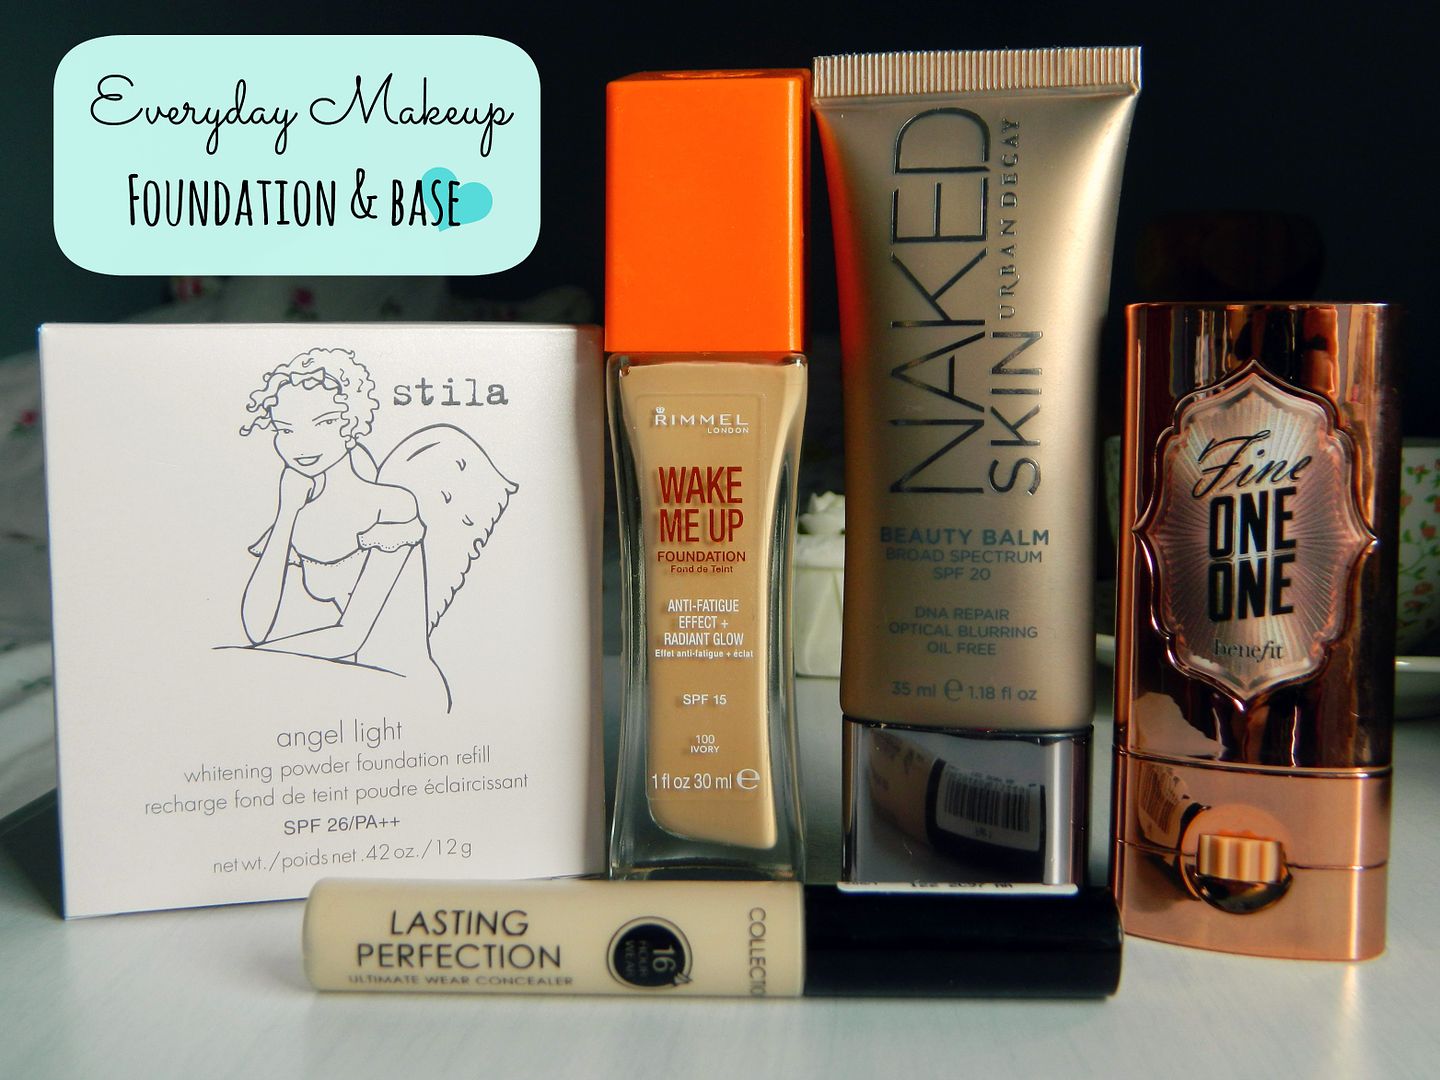 Everyday Makeup Products Foundation Base Rimmel Stila Urban Decay Benefit Collection 2000 Review Belle-amie